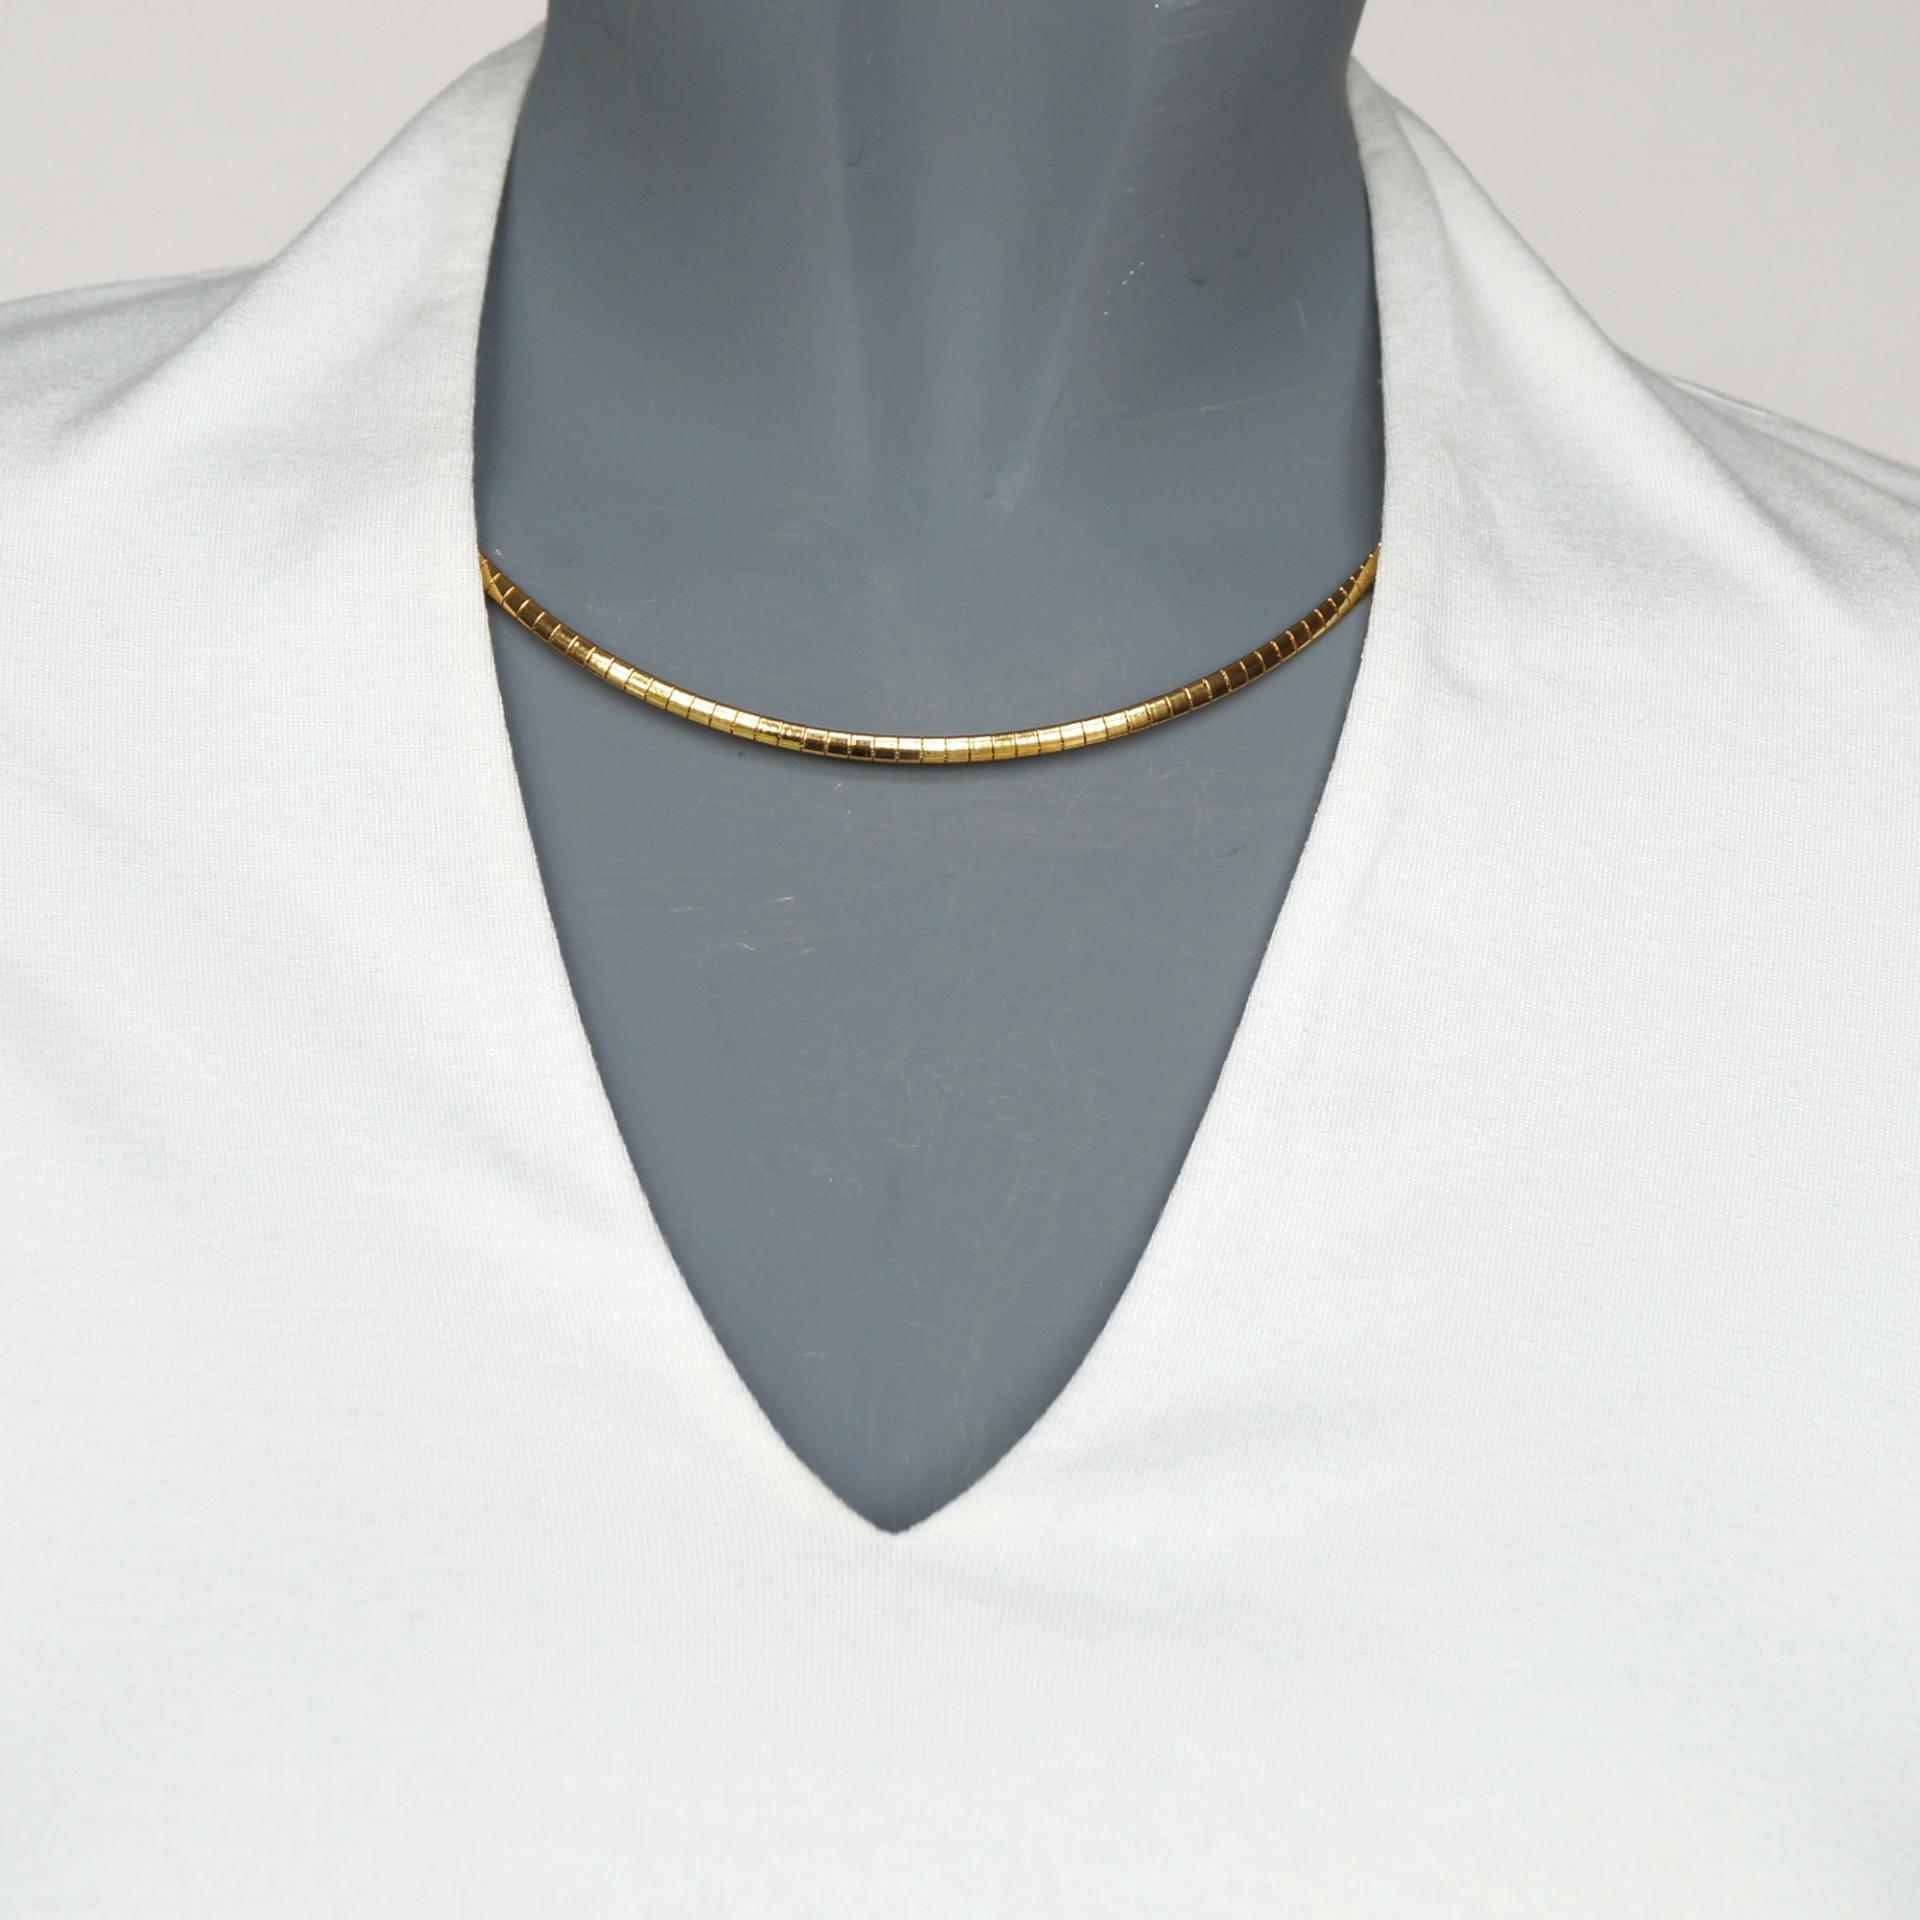 Stainless steel, omega necklet, gold plated, rose gold plated